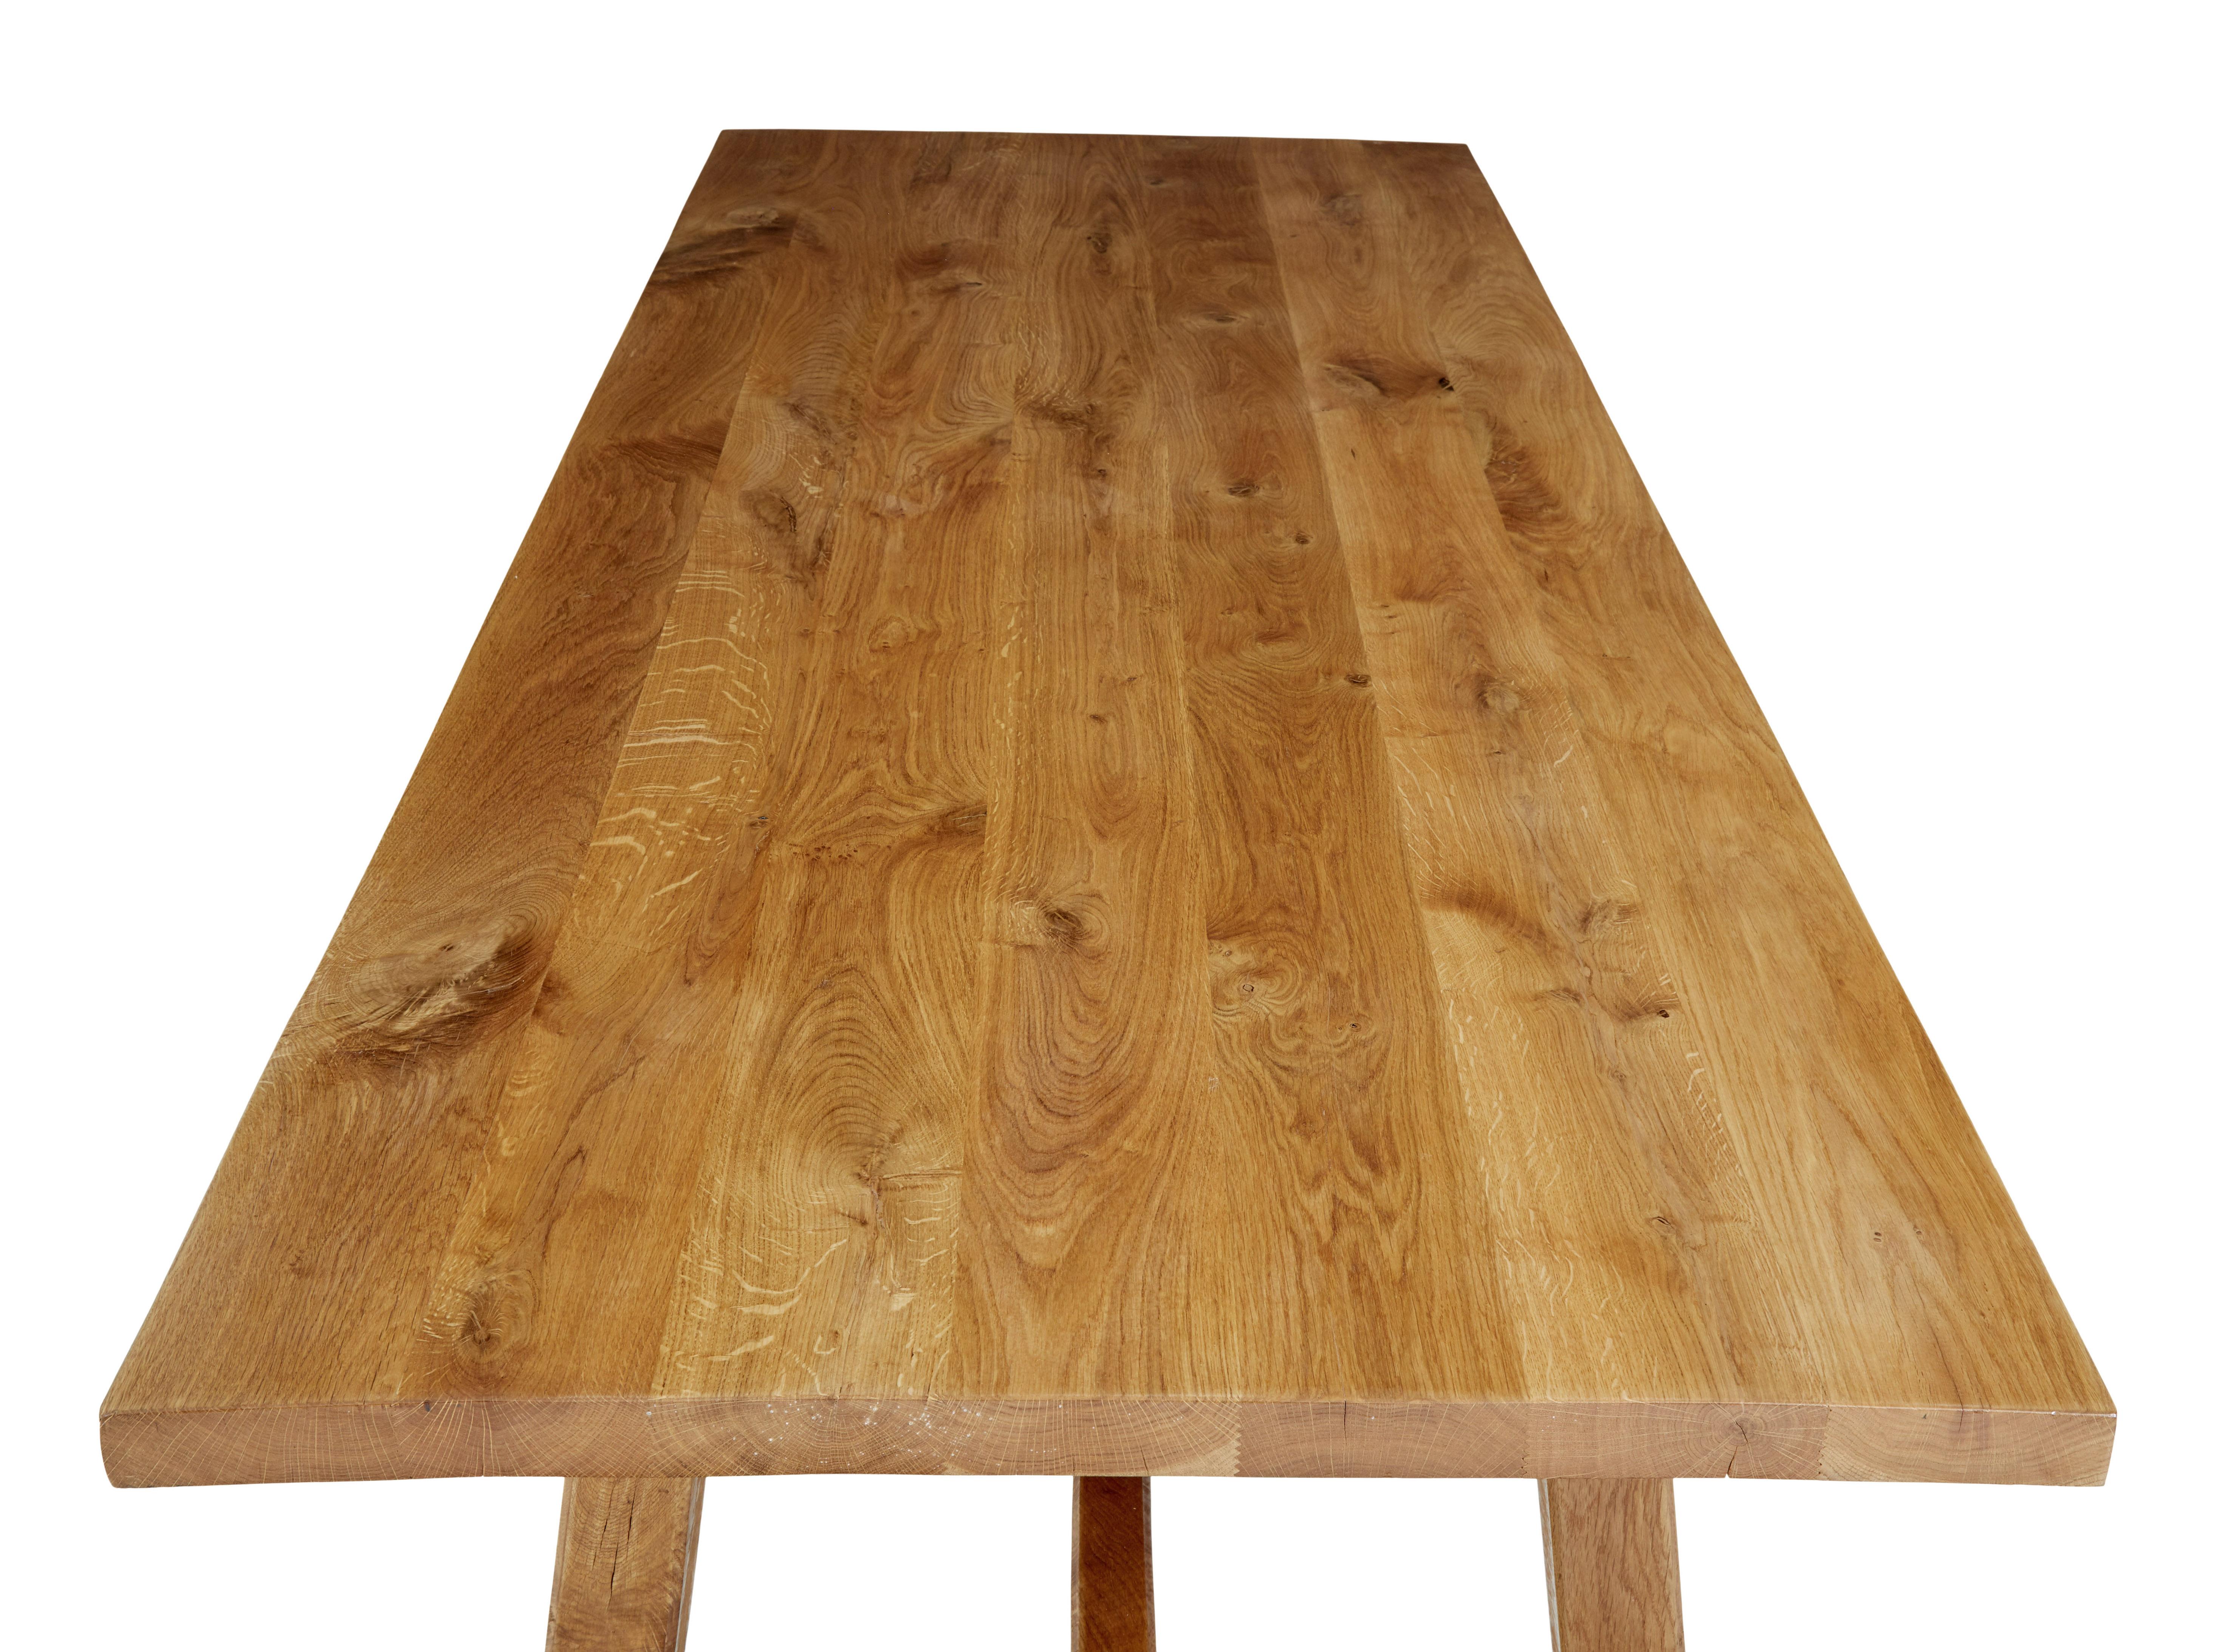 20th Century Impressive Solid Oak Dining Table and Benches by Garbo